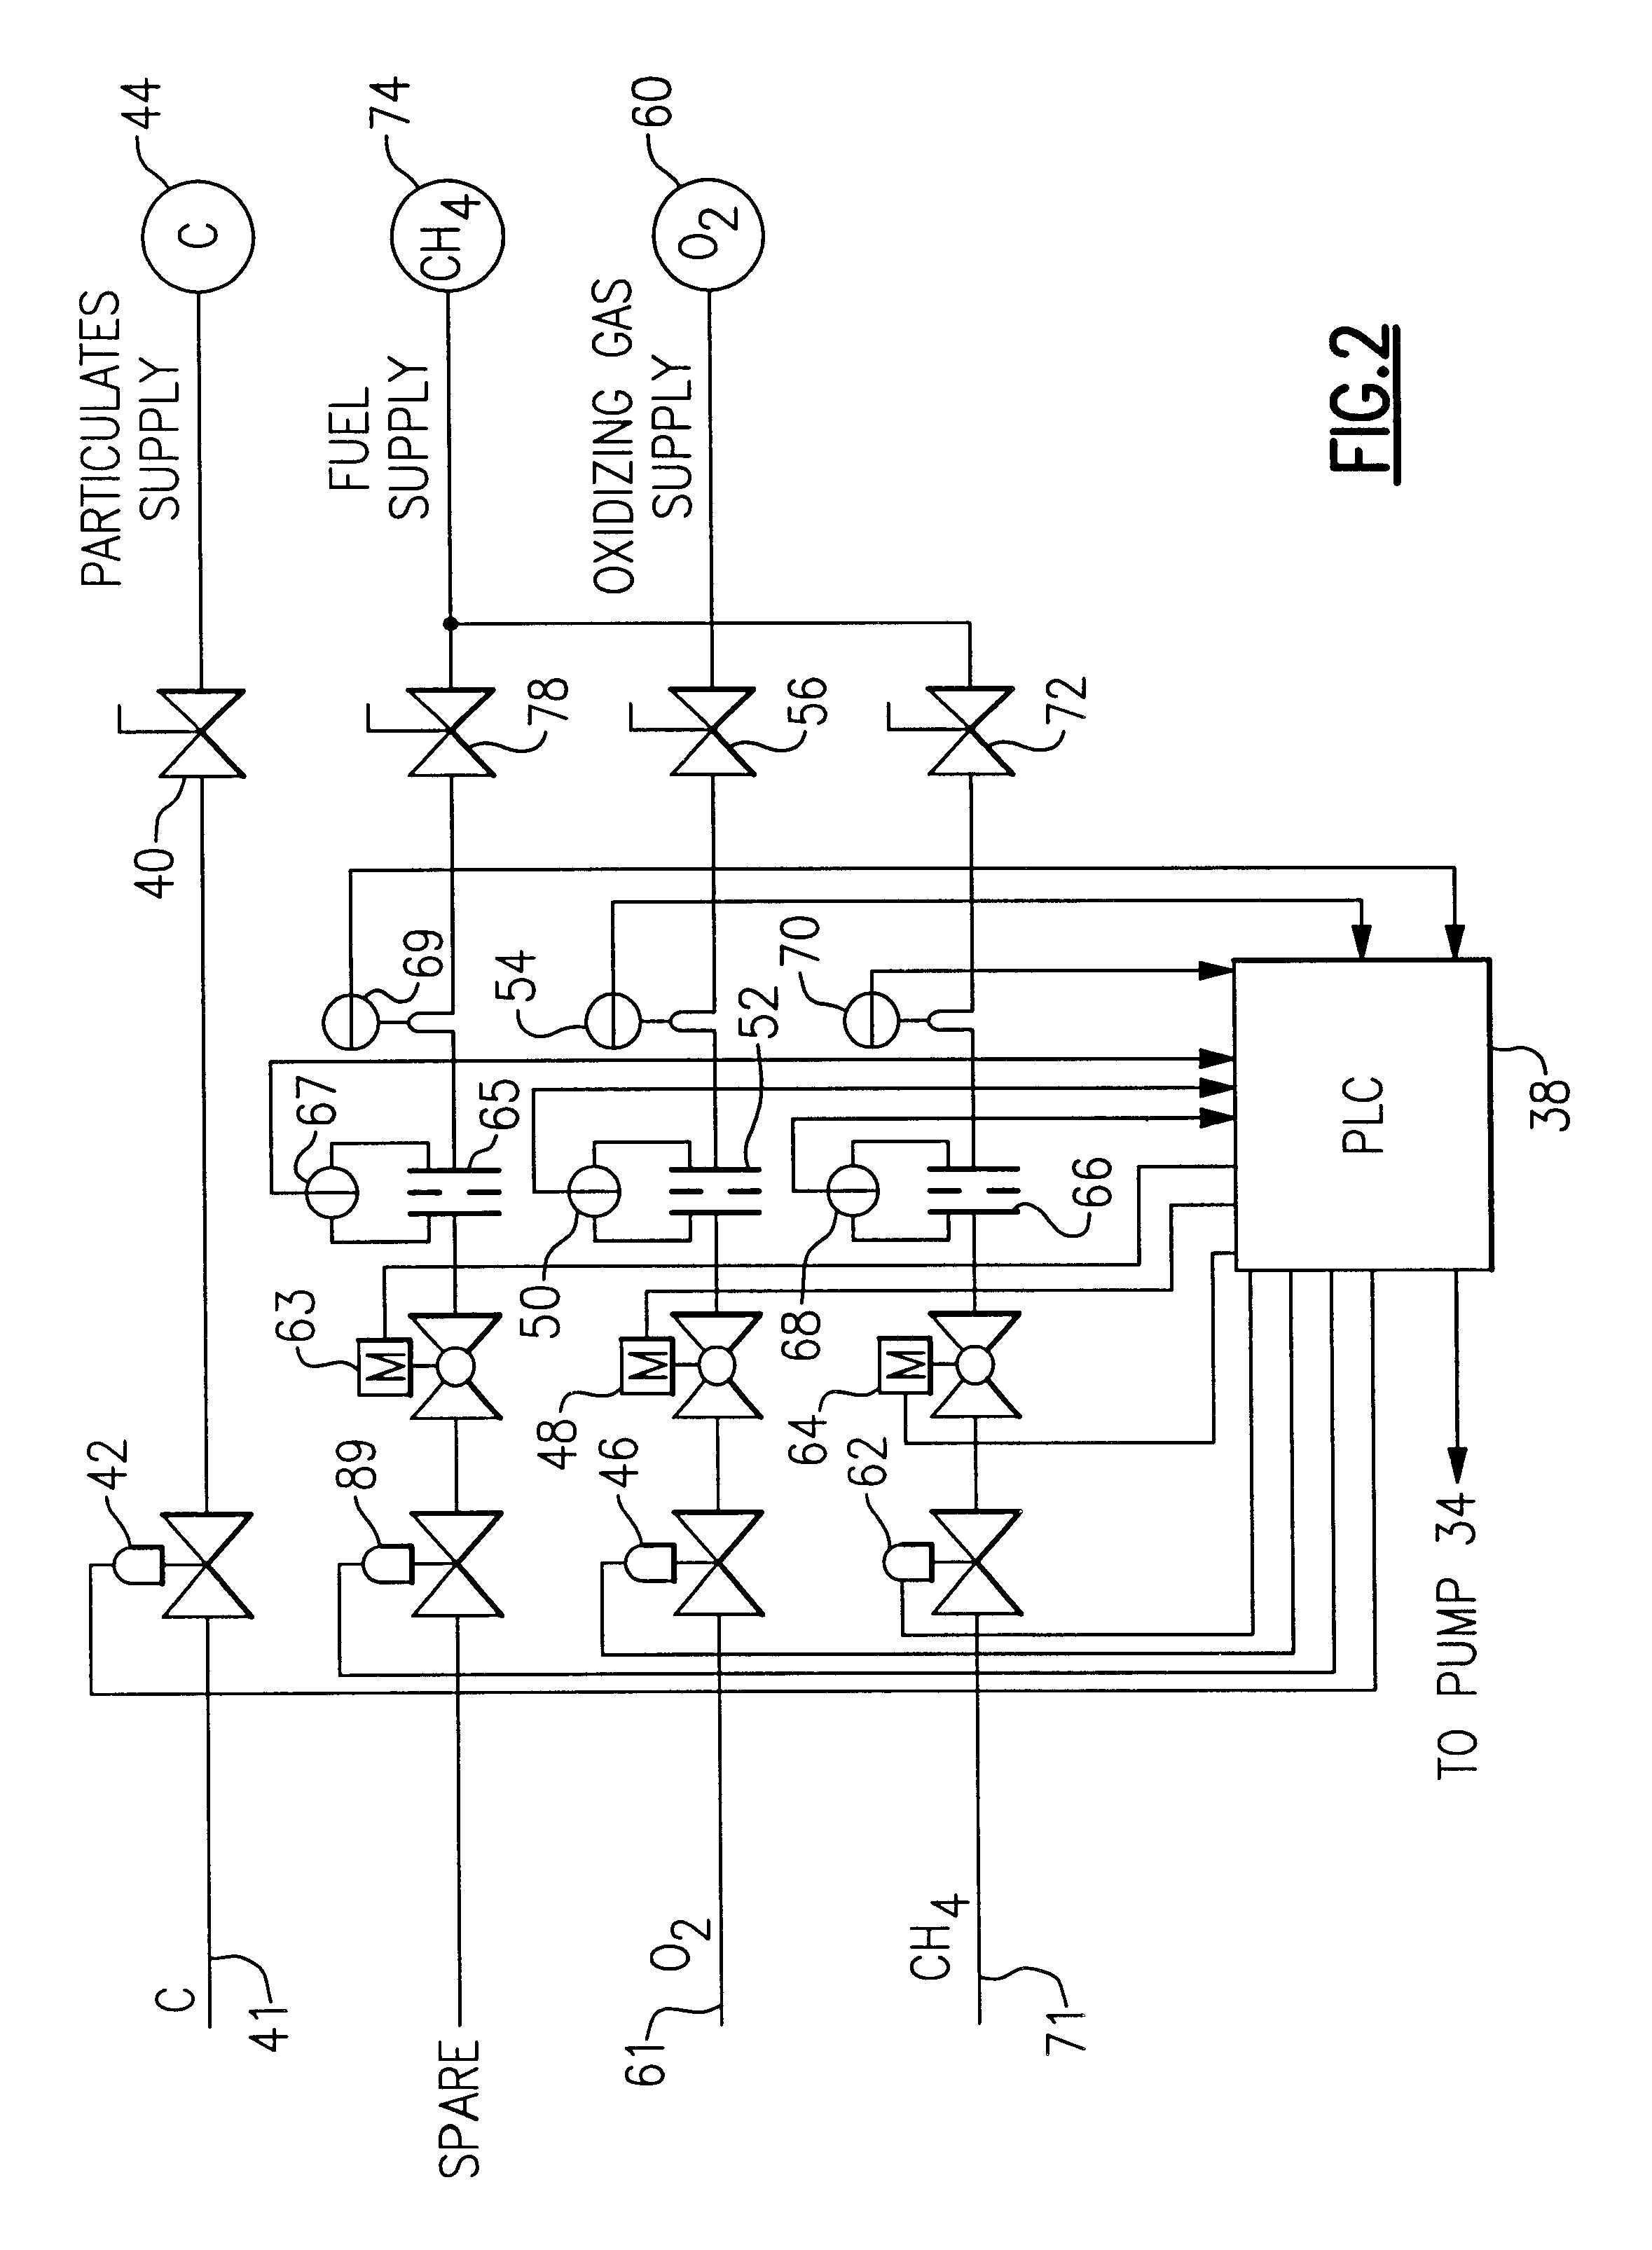 Method for metal melting, refining and processing